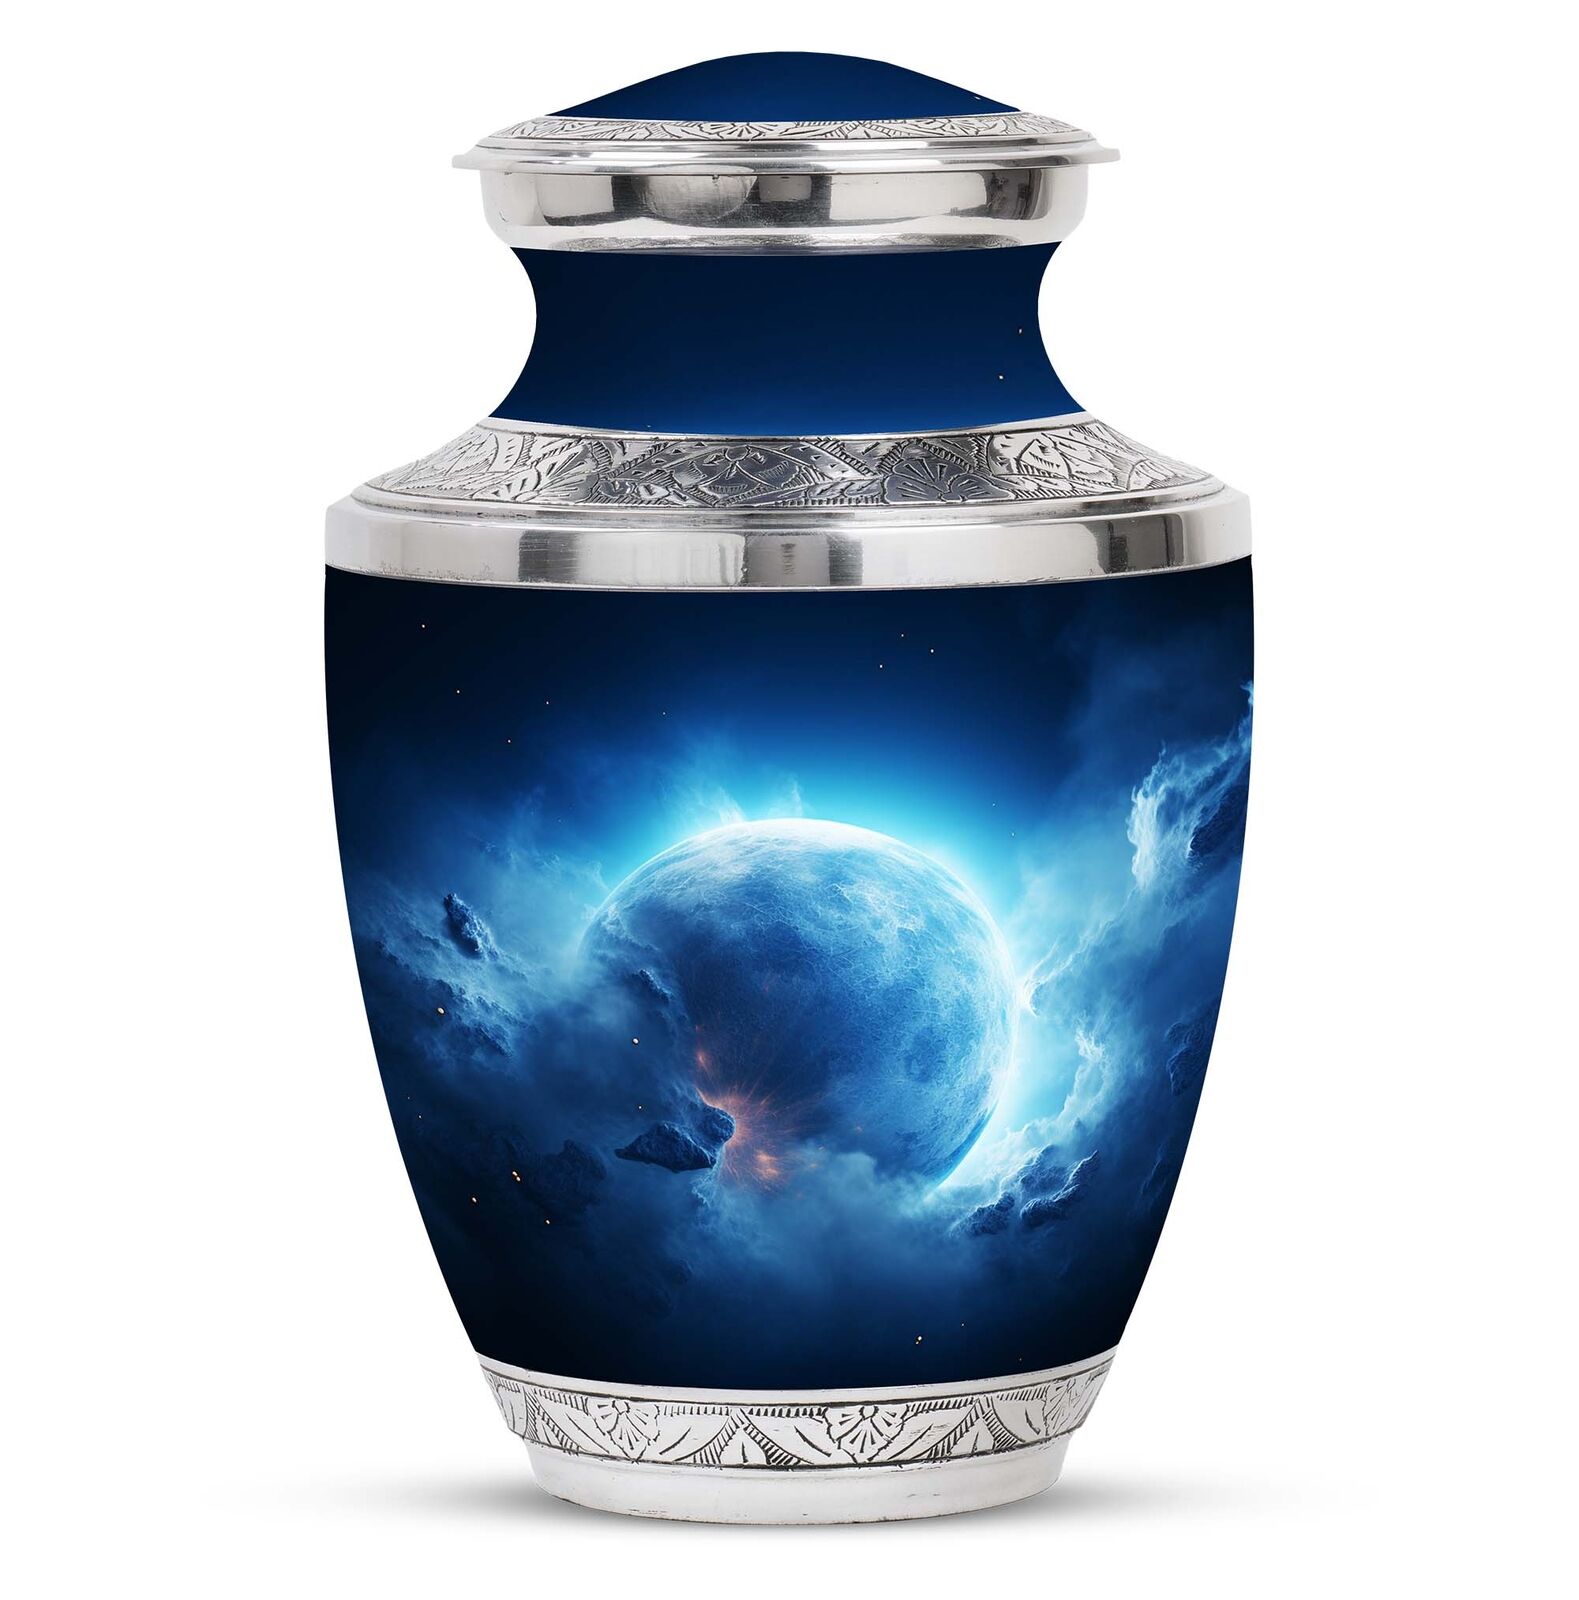 Awakening of a Celestial Giant Large Burial Urns For Ashes Size 10 Inch